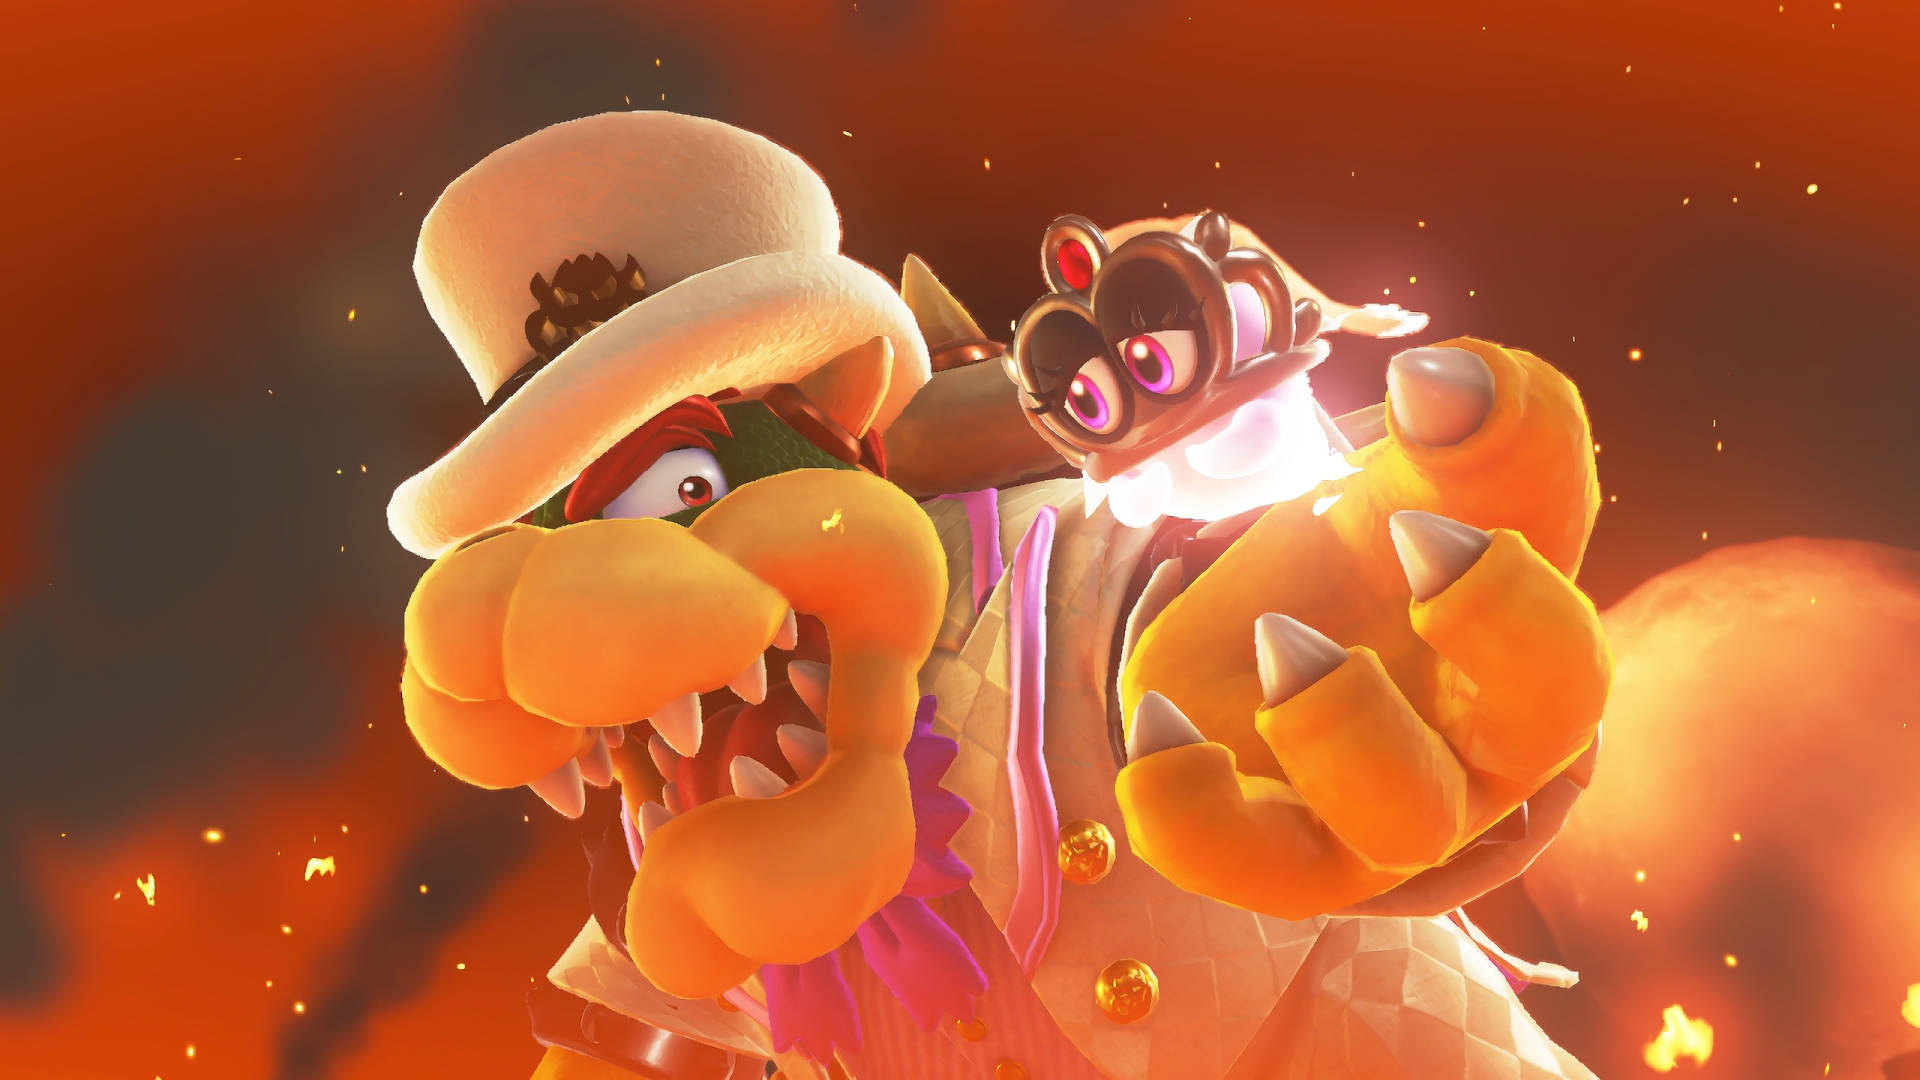 Super Mario Odyssey Bowser And Tiara In Flames Background